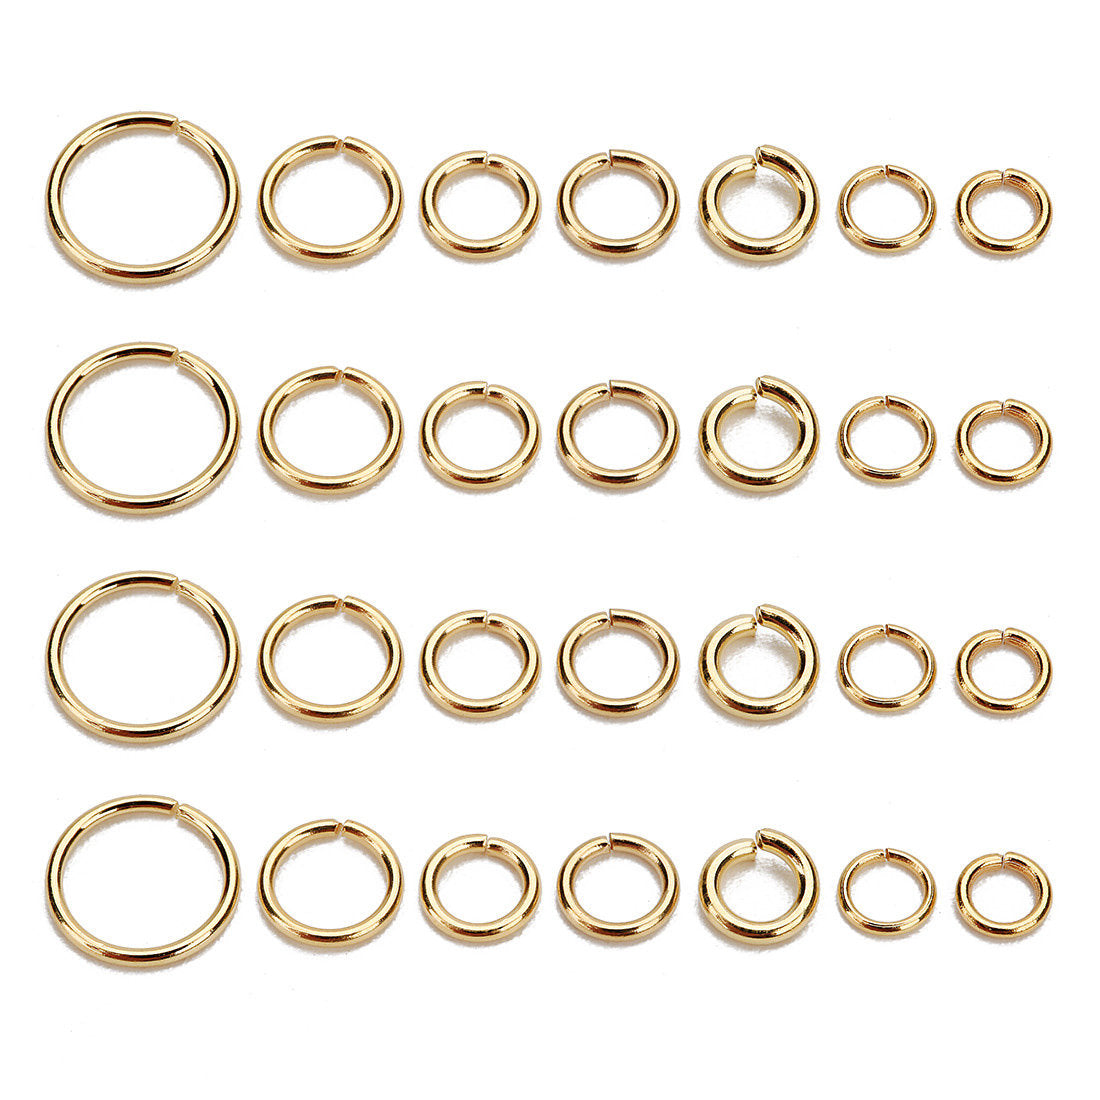 100 Gold plated stainless steel jump rings